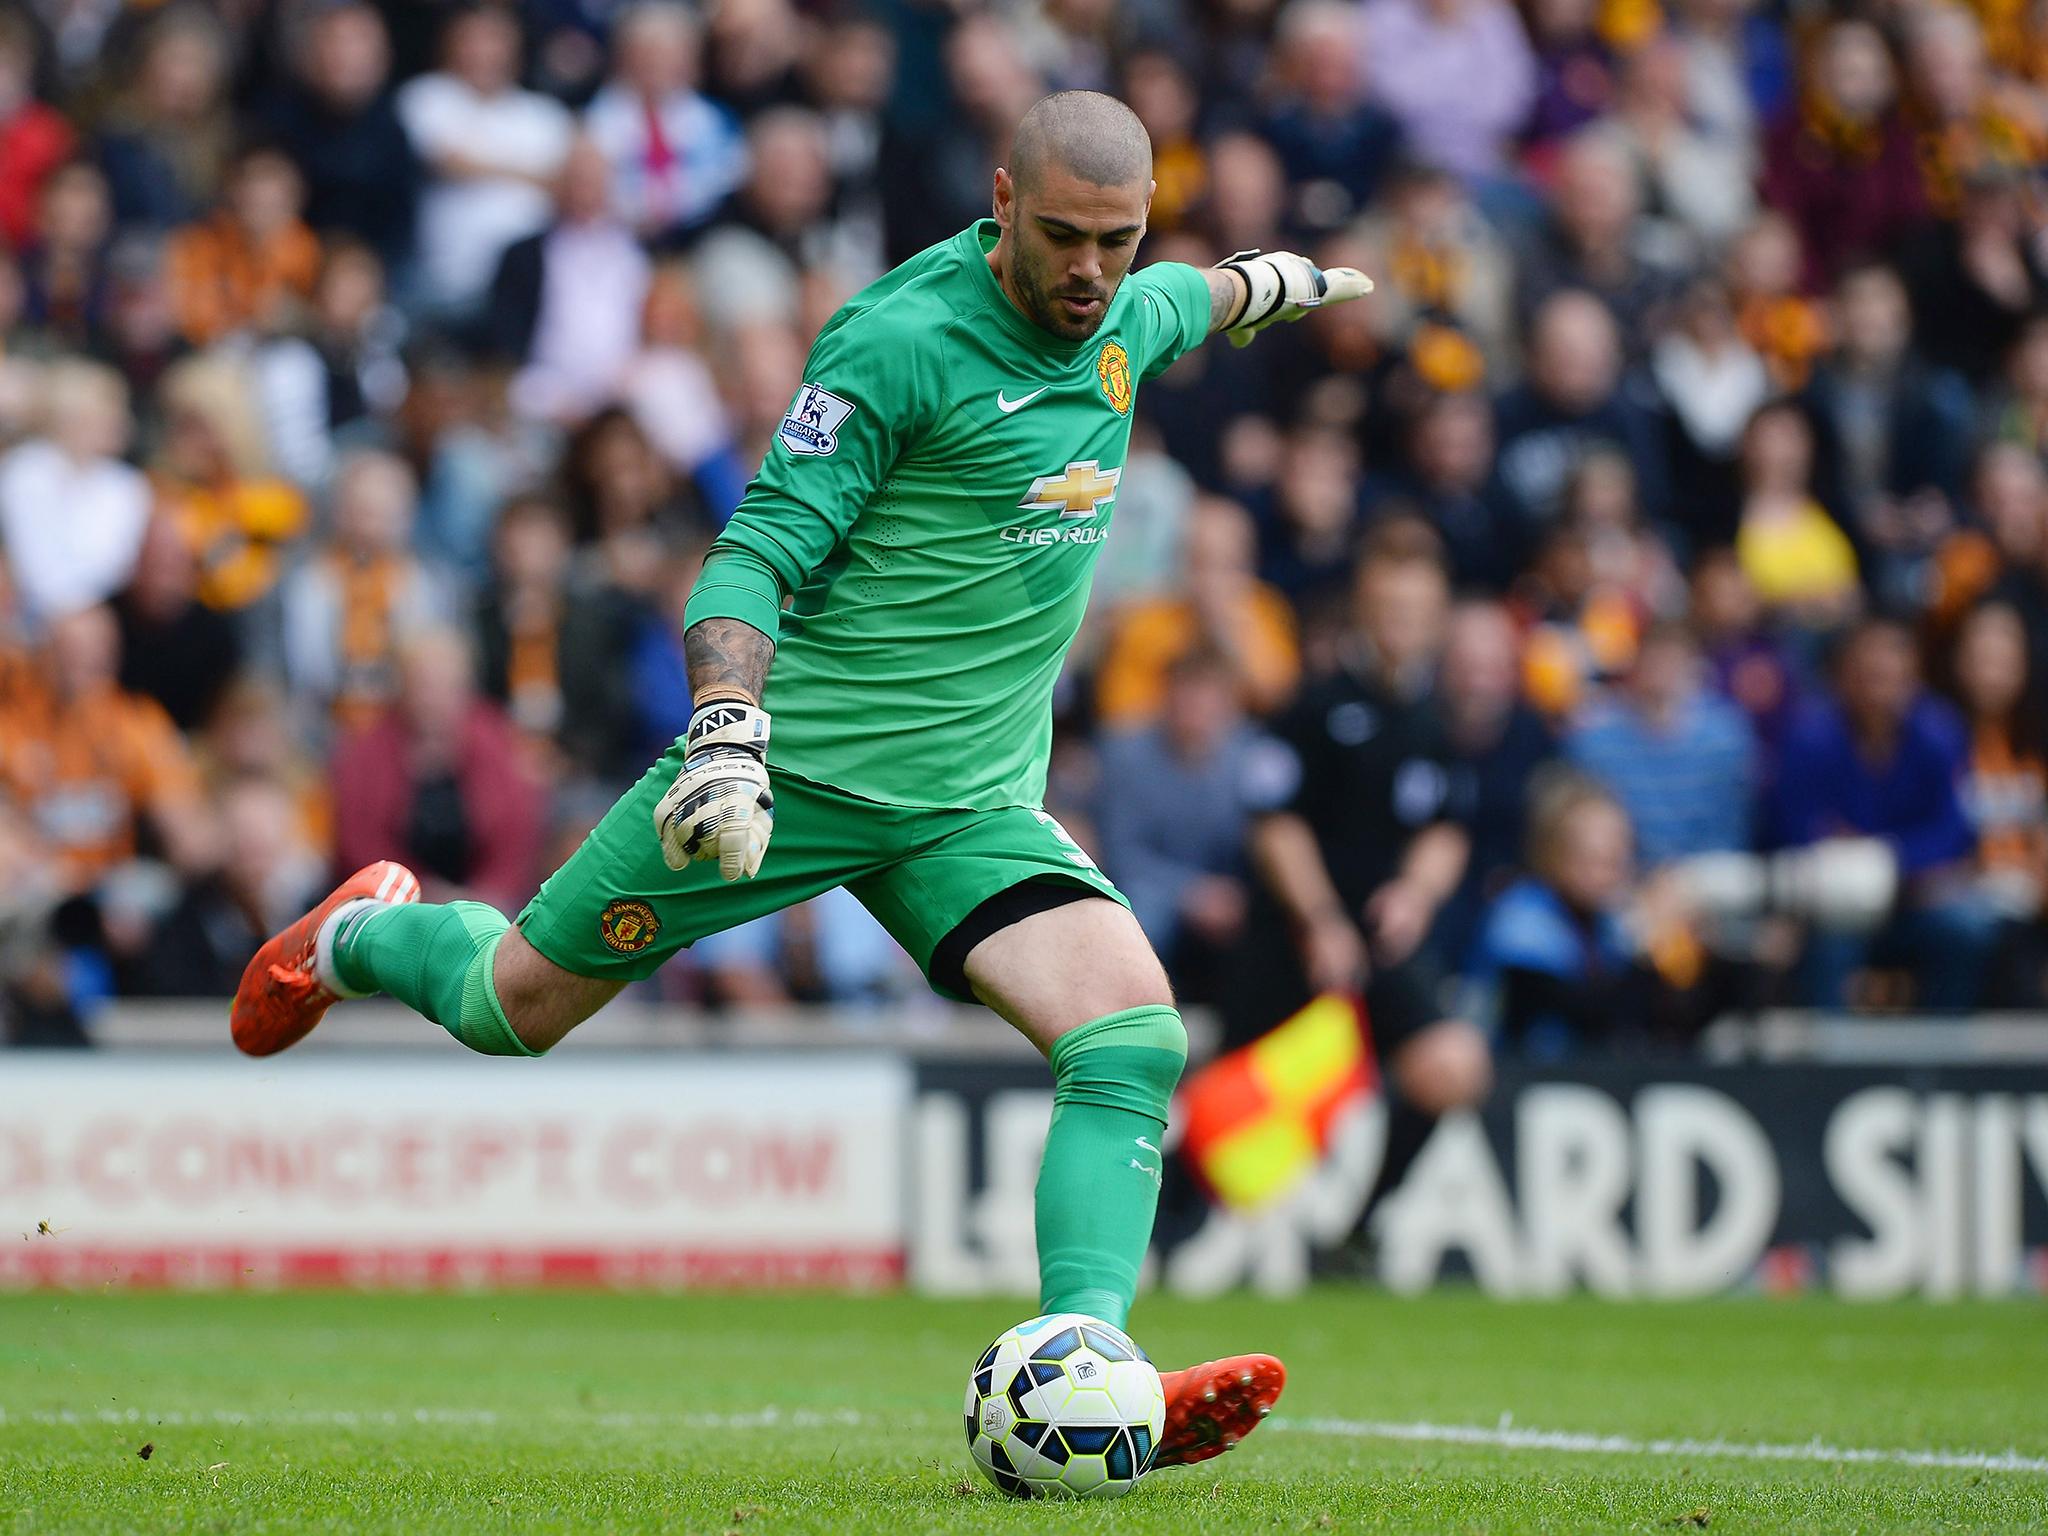 Victor Valdes finally ended his nightmare United stay